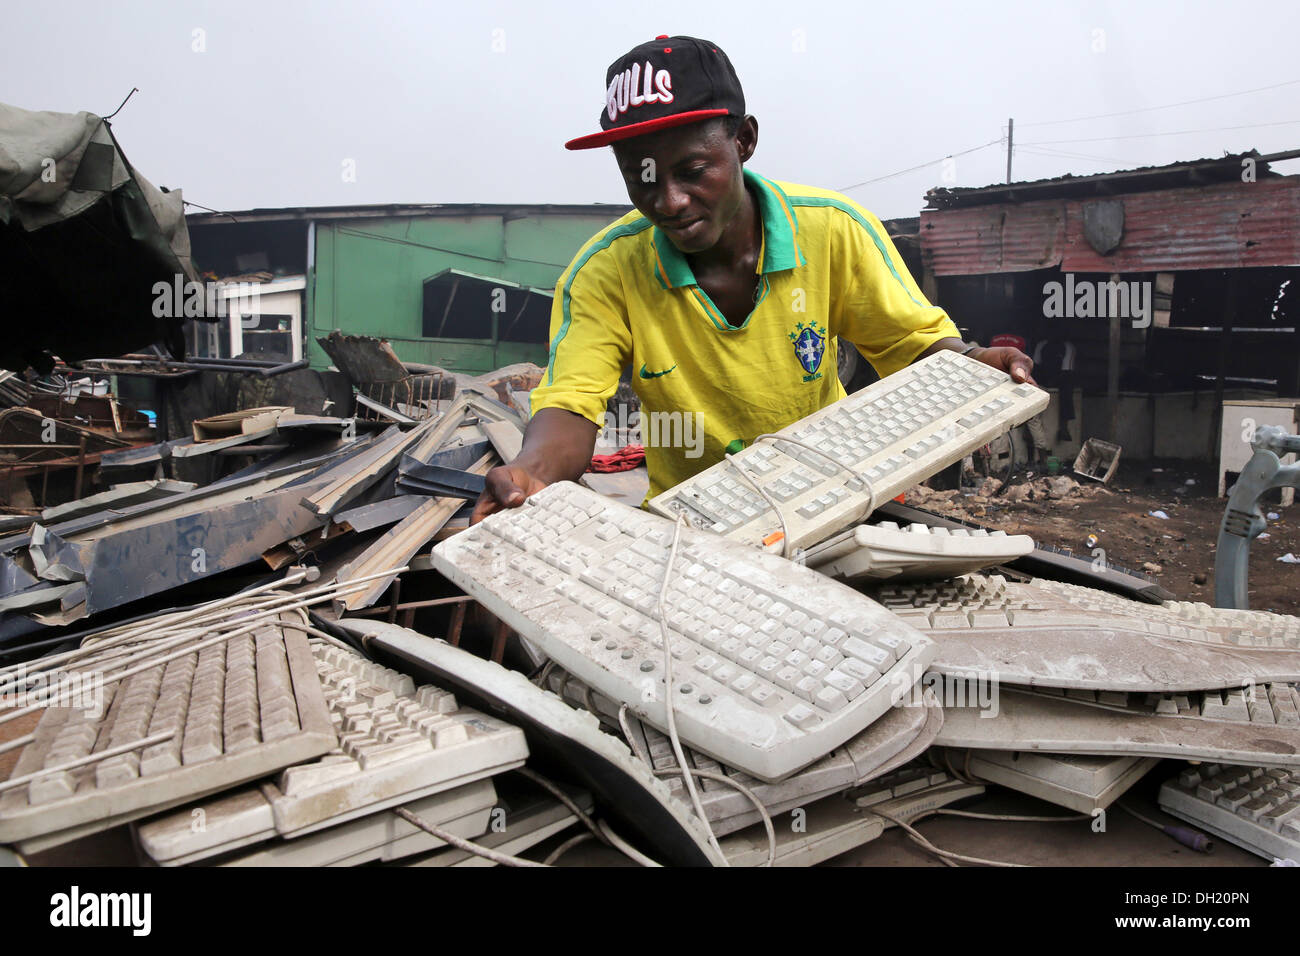 Man dismantles computer keyboards and other electronics to recover metal near the Agbogbloshie slum in Accra, Ghana Stock Photo